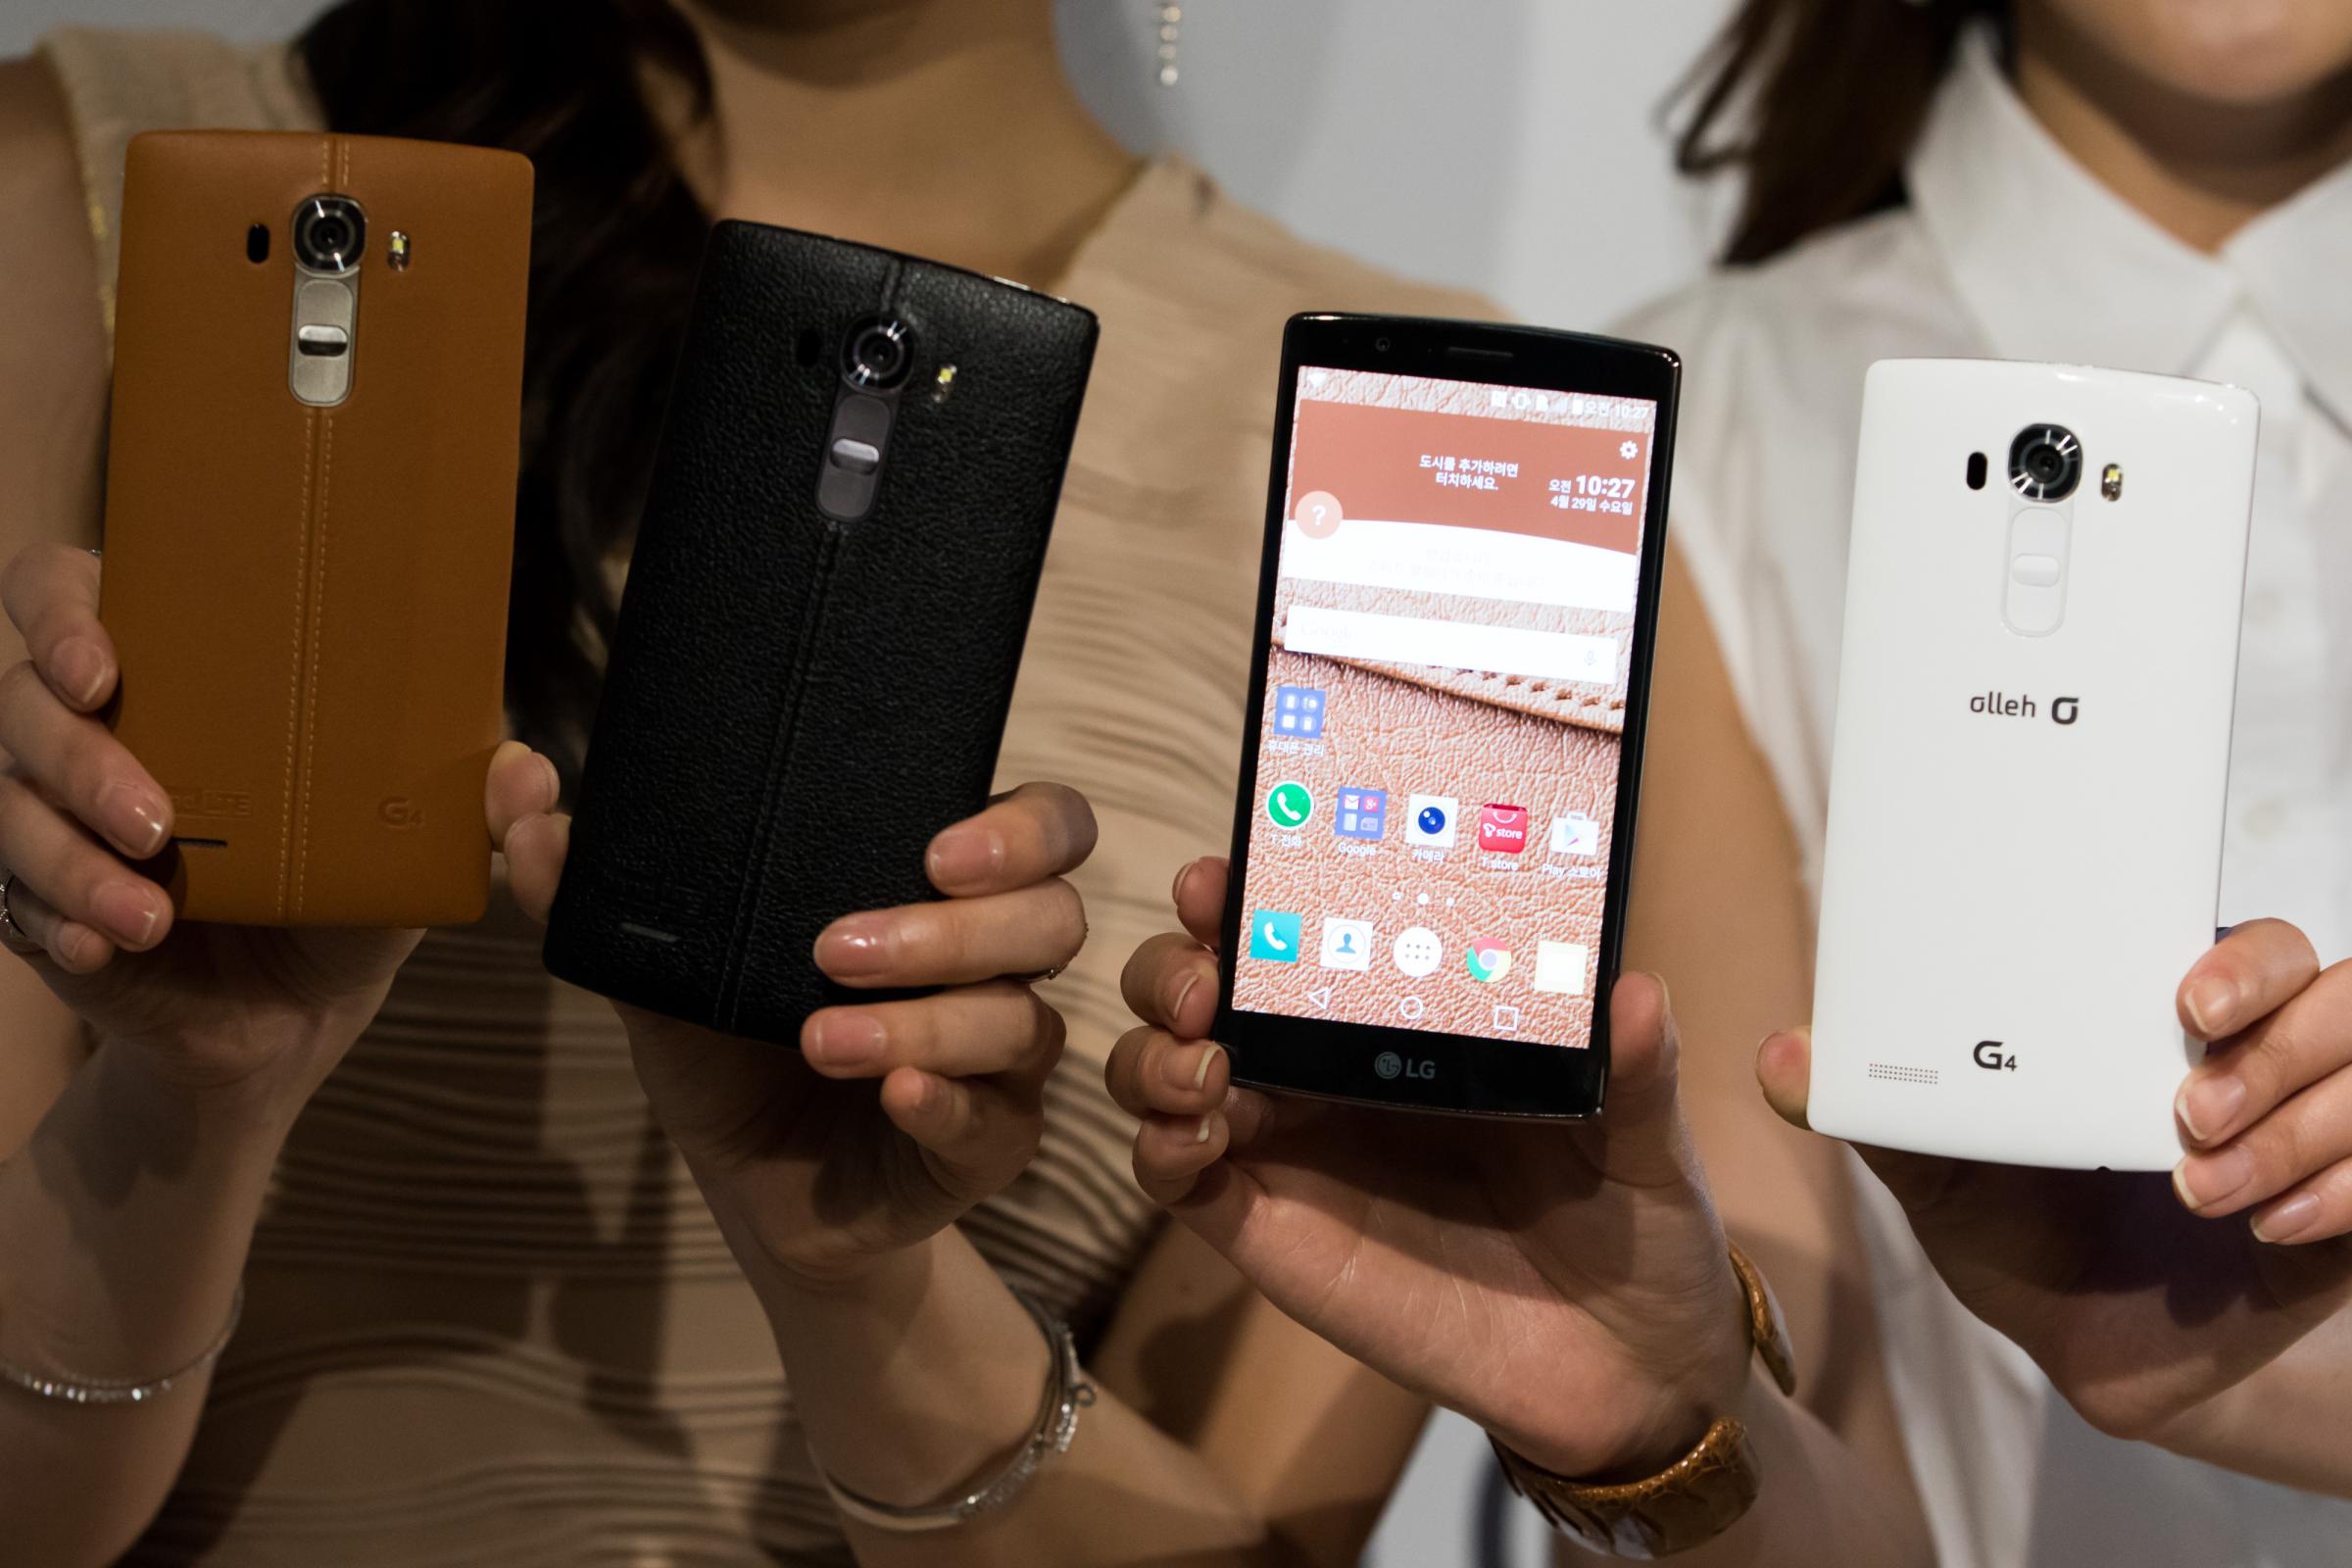 LG Electronics Inc. Launches the G4 Smartphone